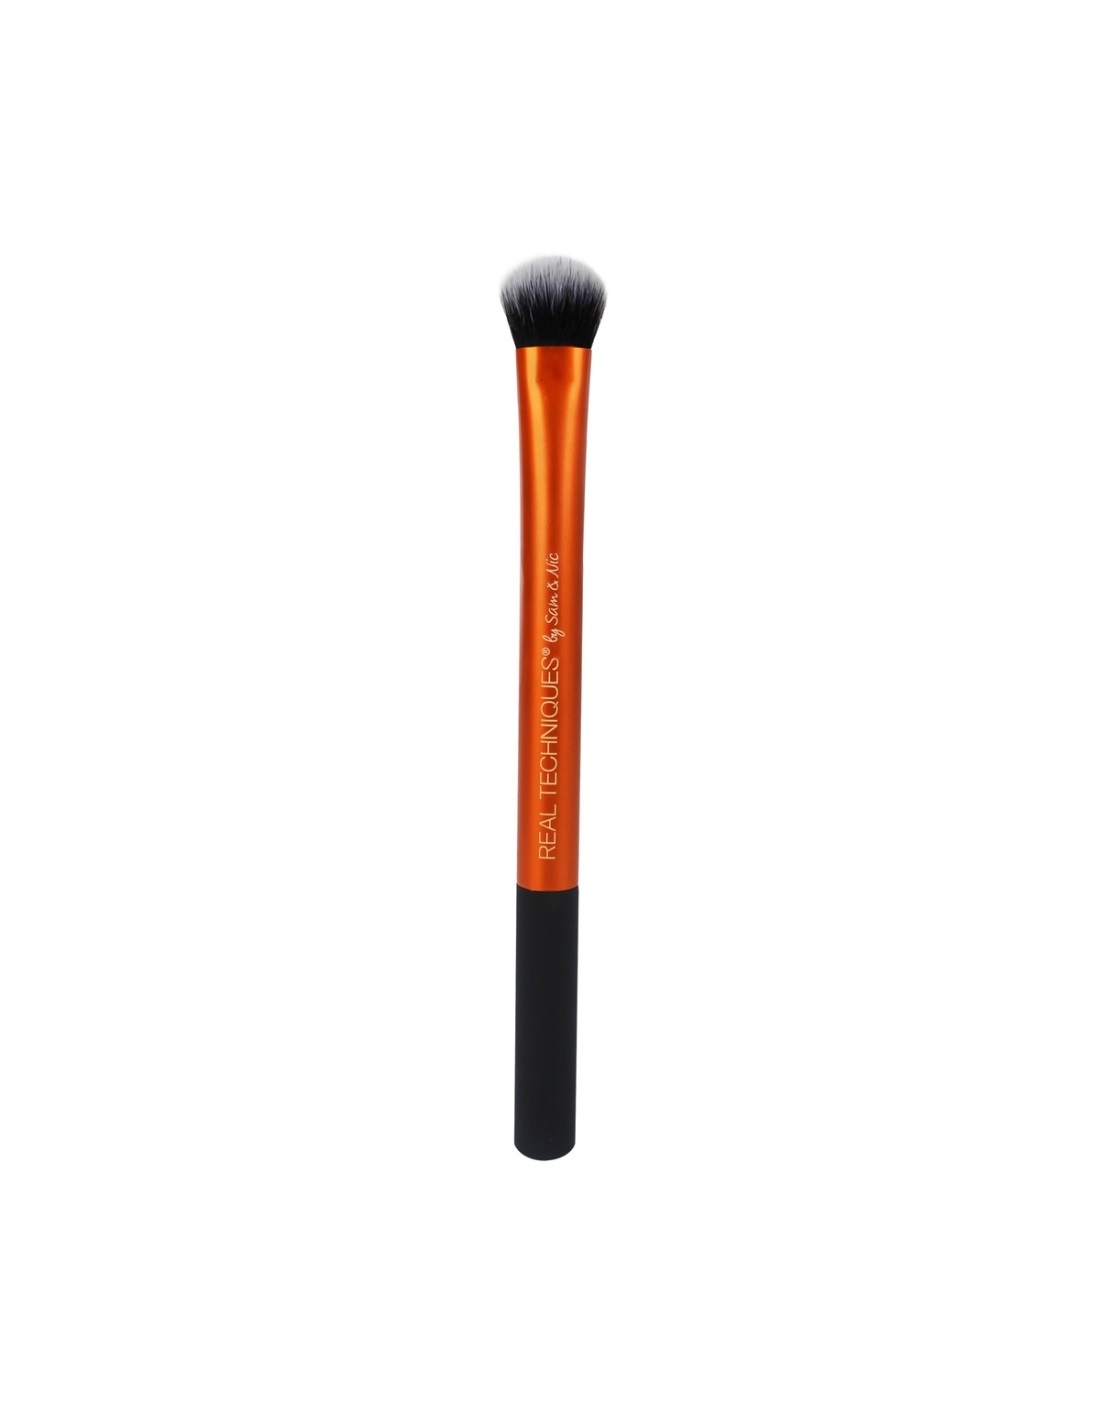 Real Techniques Makeup Brushes: What For